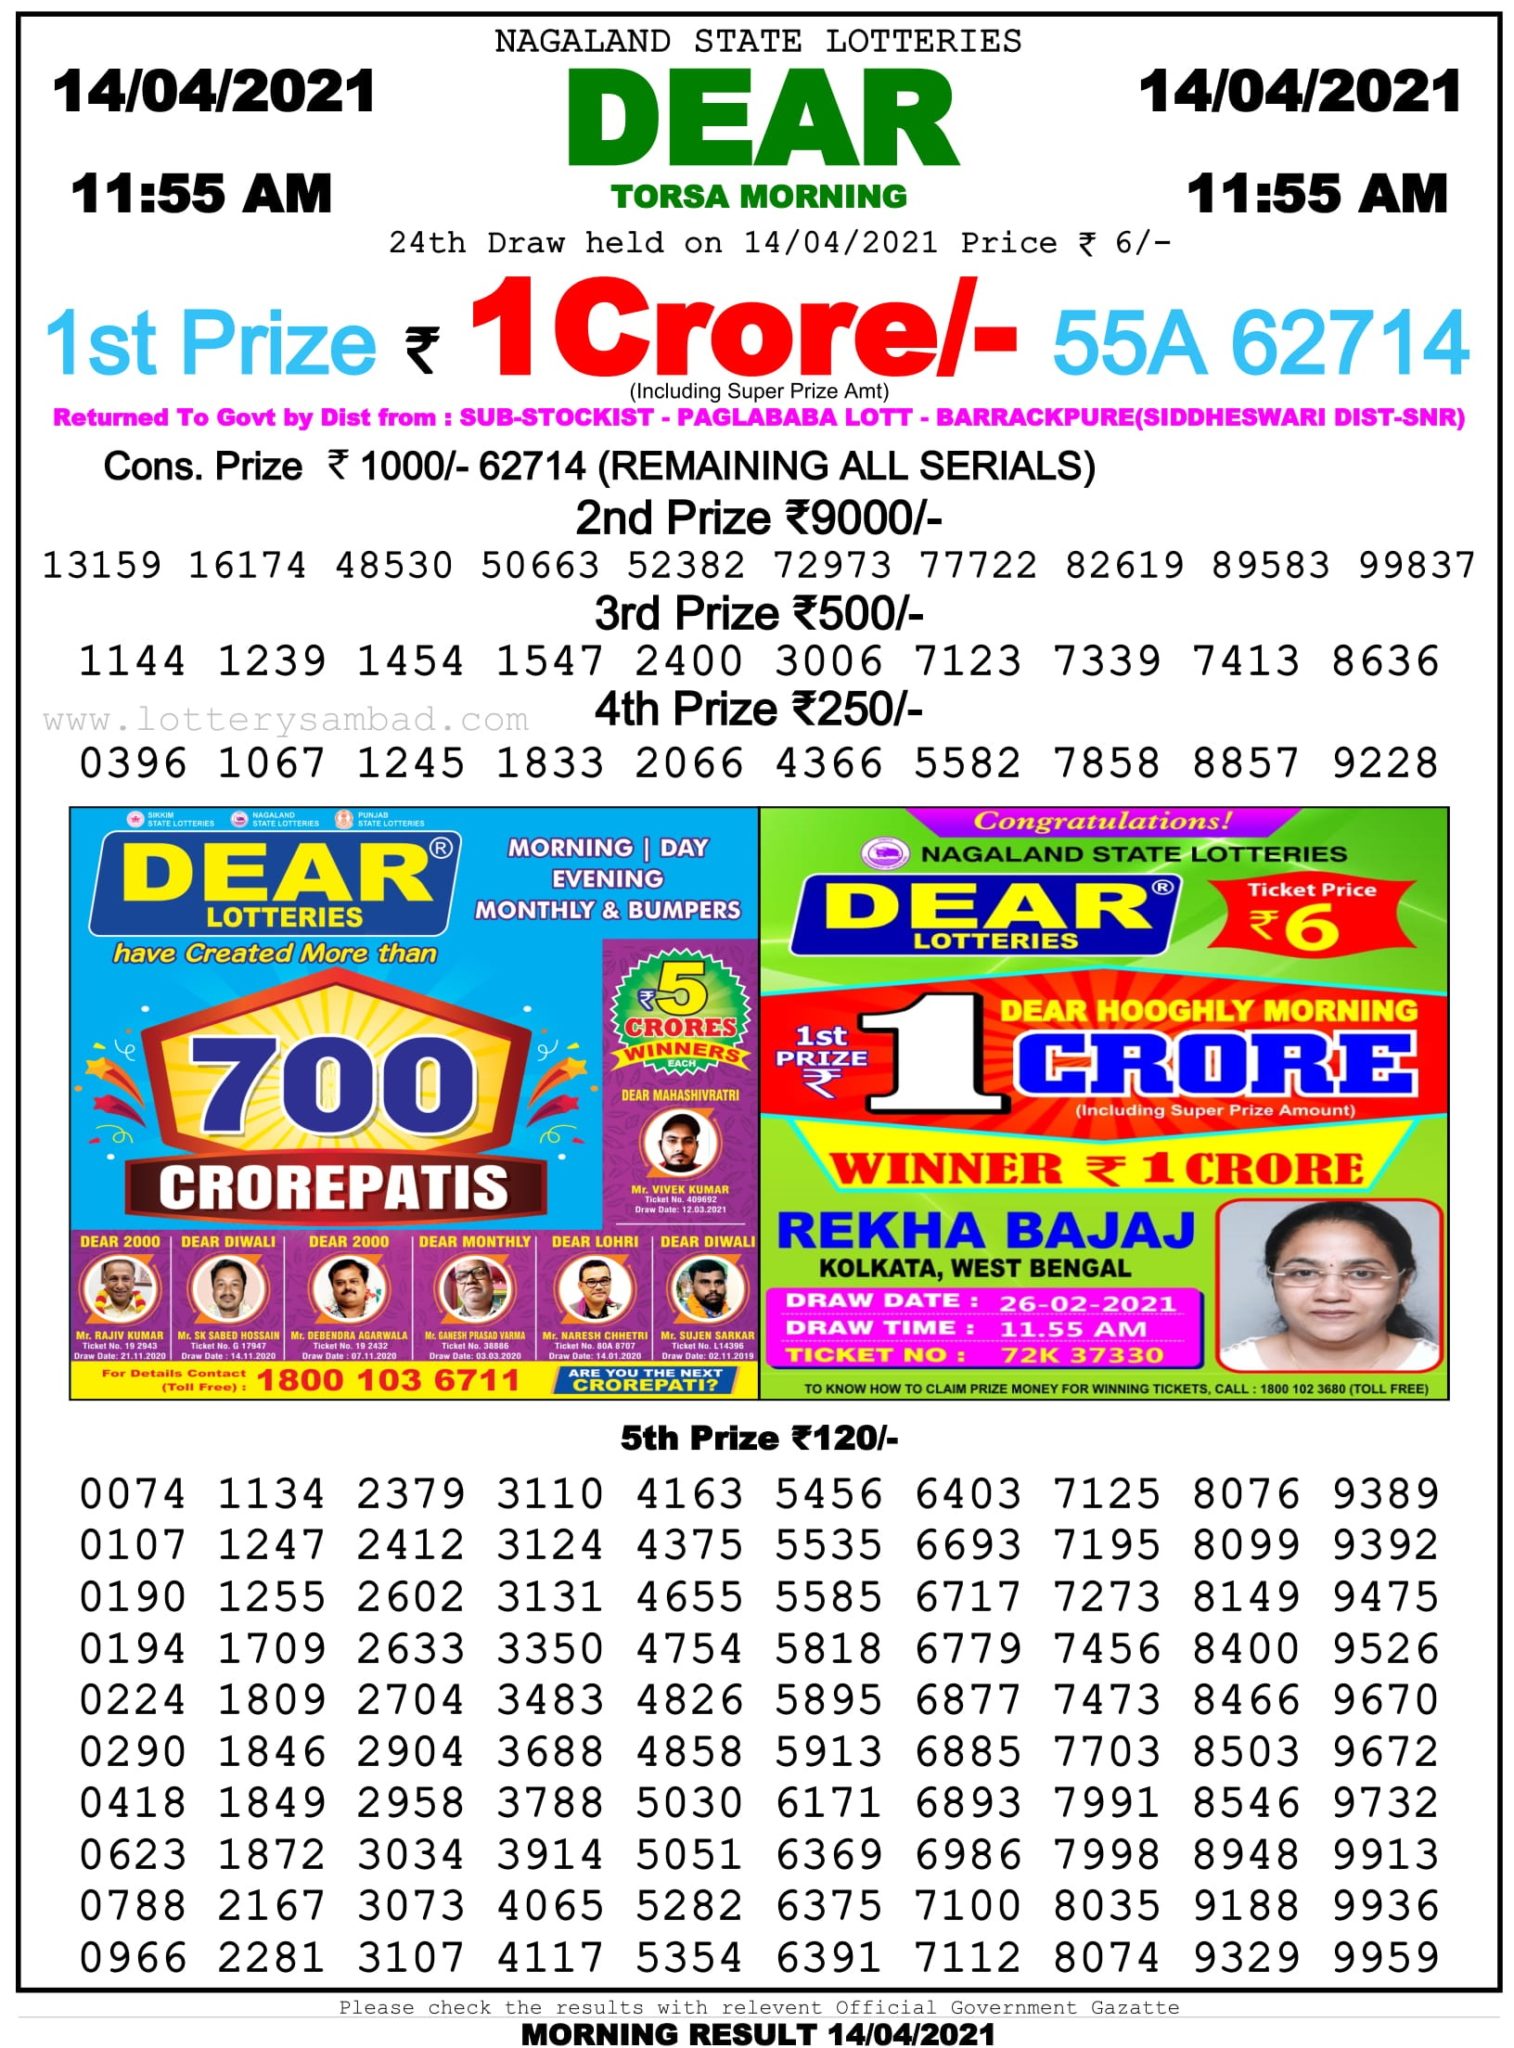 Dear Daily Lottery Result 11.55AM 14 Apr 2021